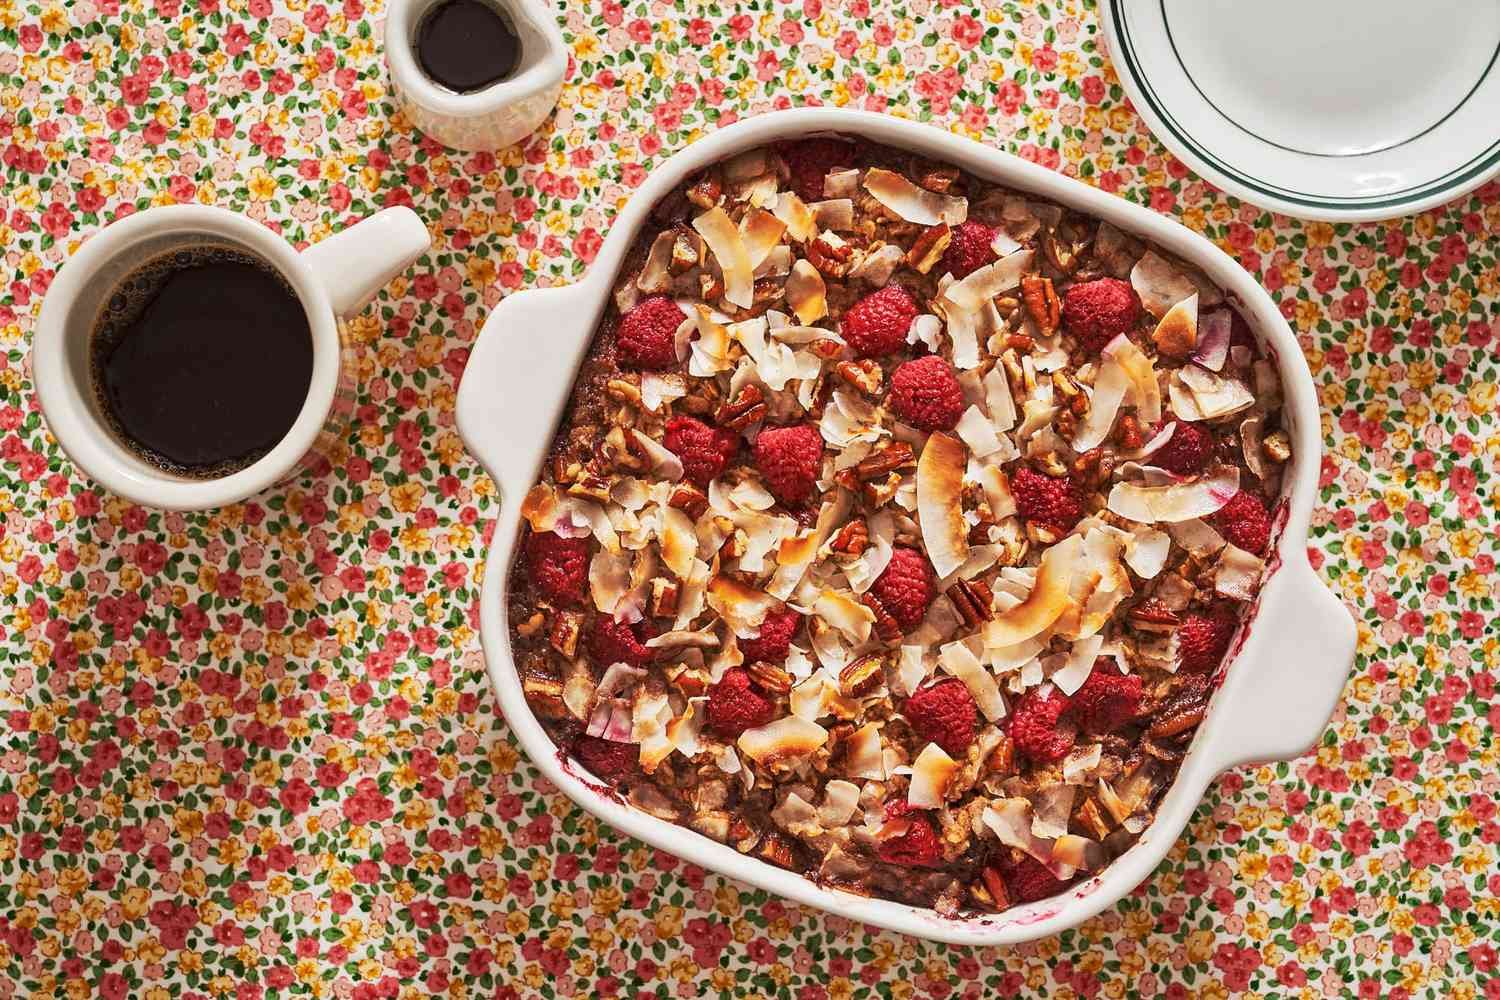 Brown Butter-Raspberry Baked Oatmeal